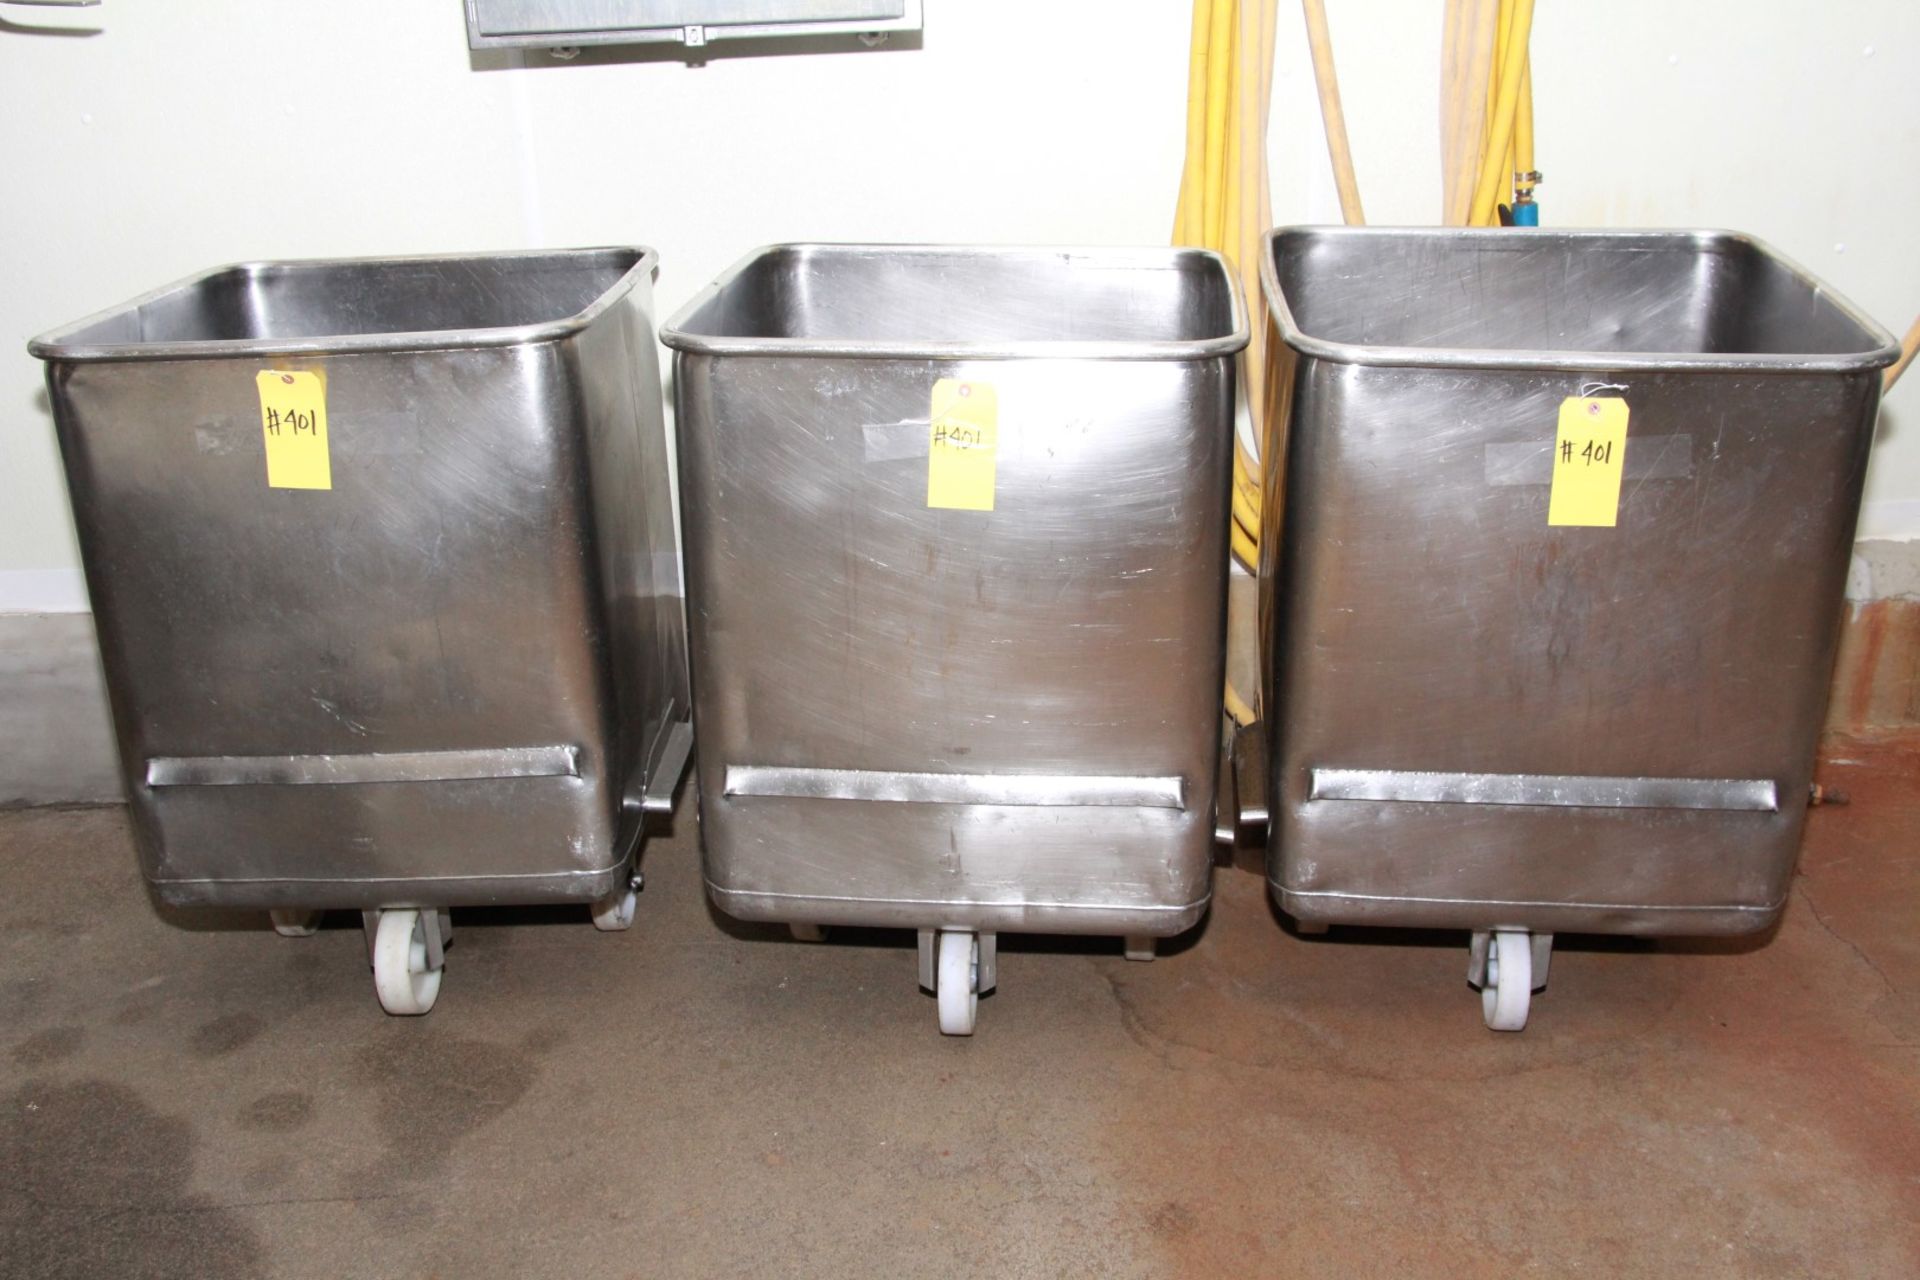 STAINLESS STEEL BUCKETS. 27" x 27" x 37". LOT OF (3).